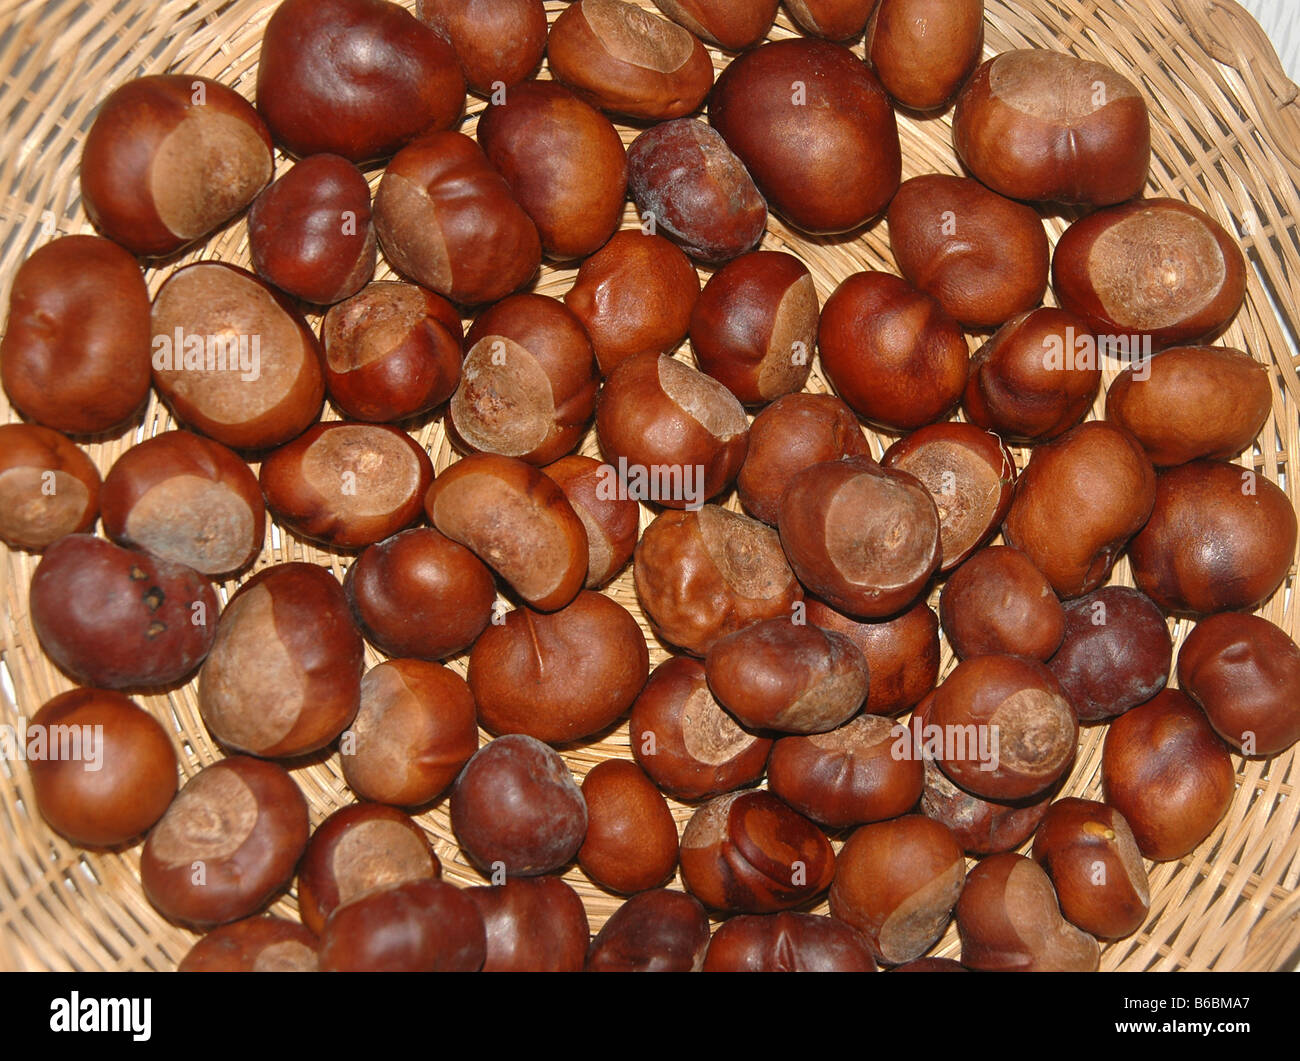 A basket full of horse chestnuts. Stock Photo